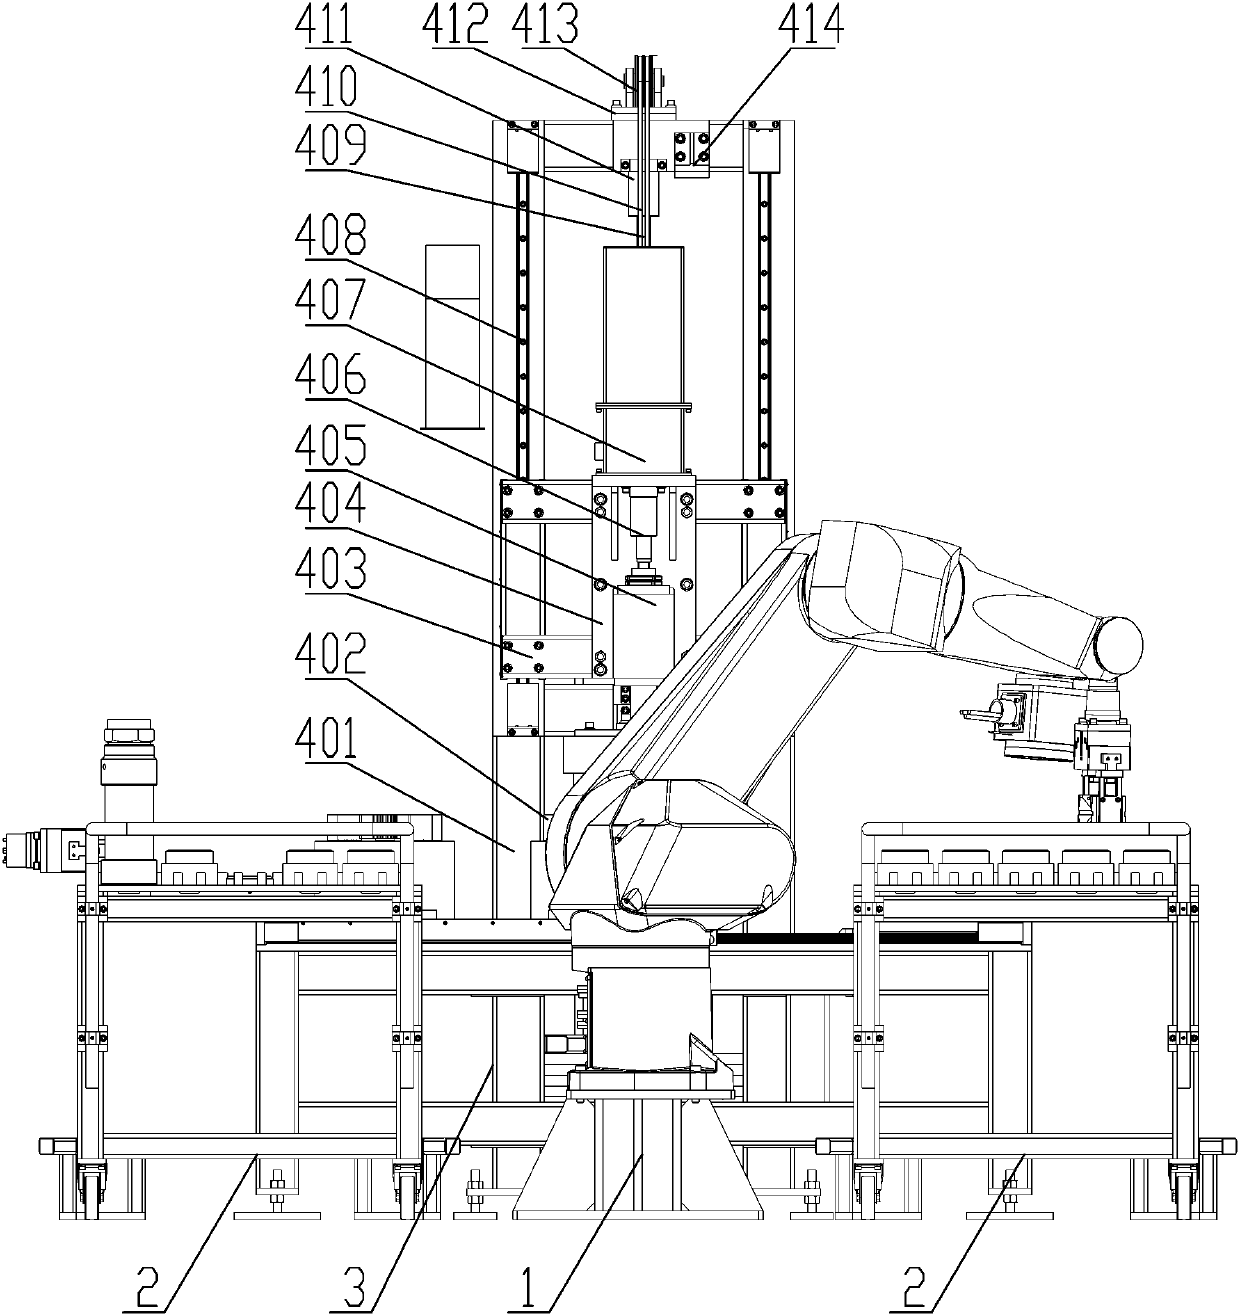 Automatic assembling system for standard test motor and assembling method